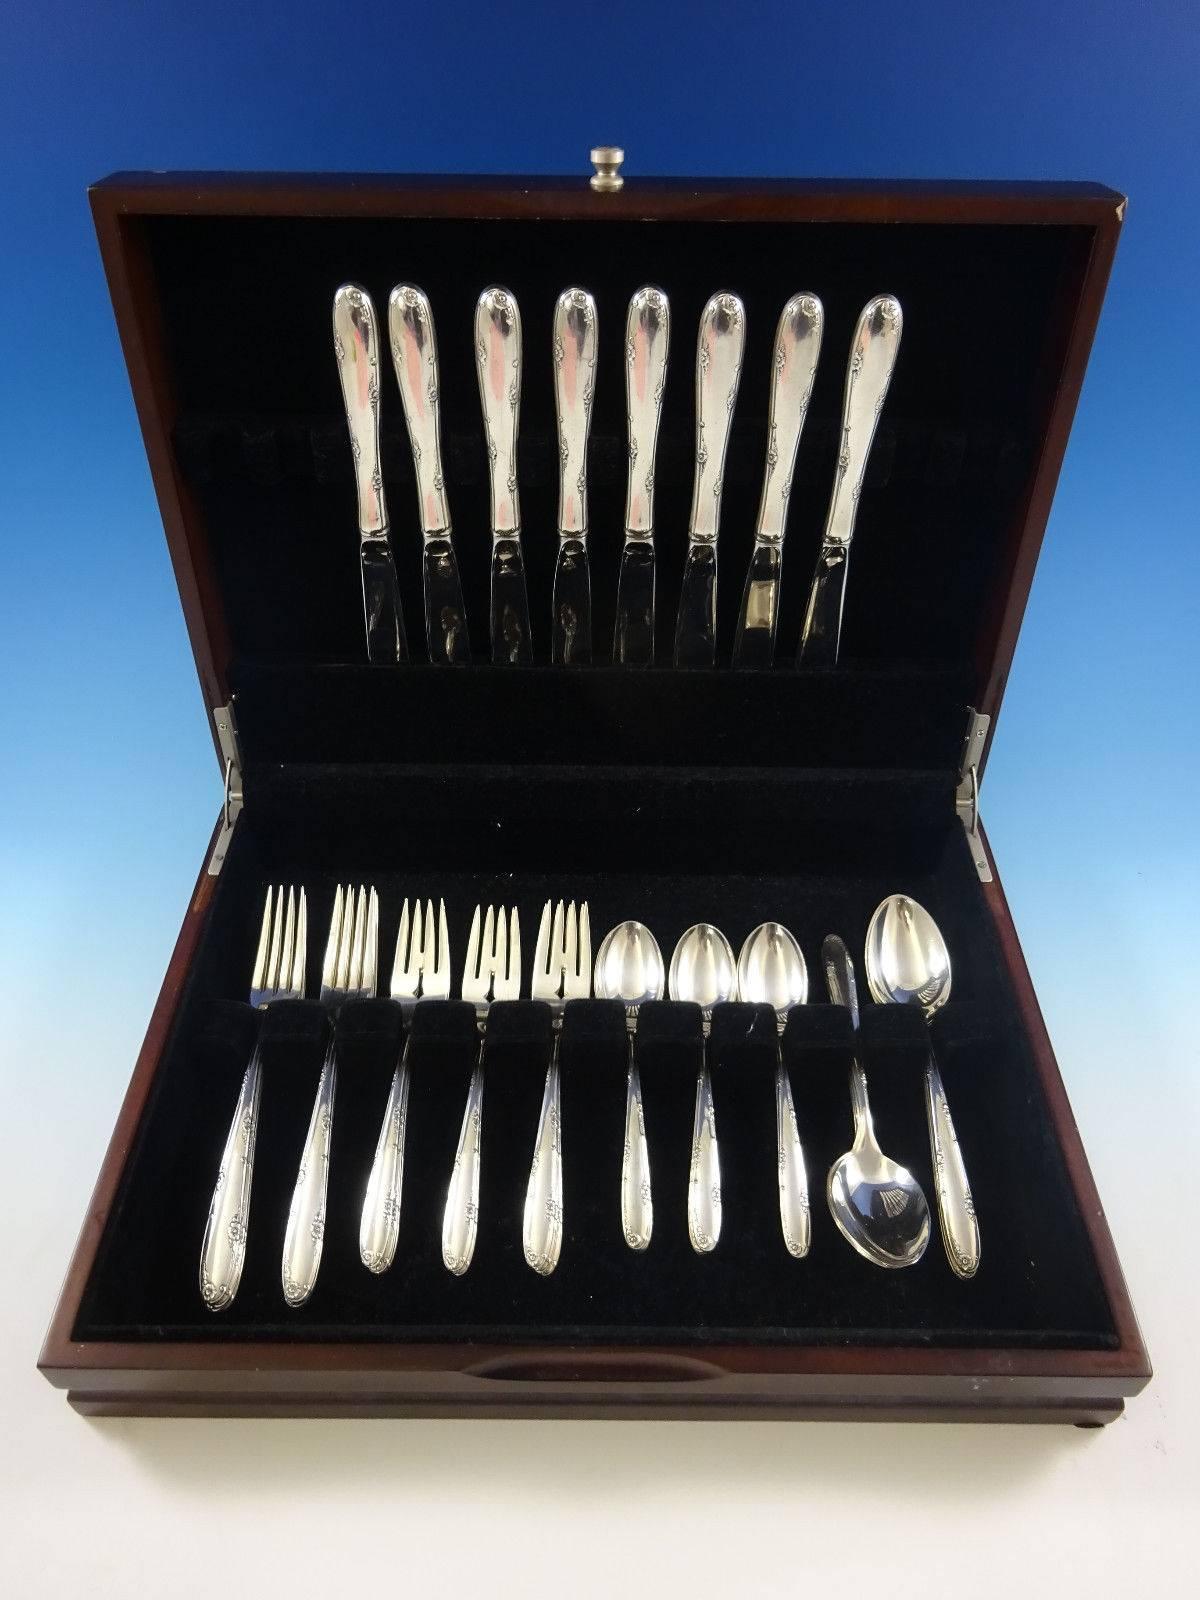 Lovely Madiera by Towle sterling silver flatware set - 40 pieces. This set includes:

8 Knives, 9